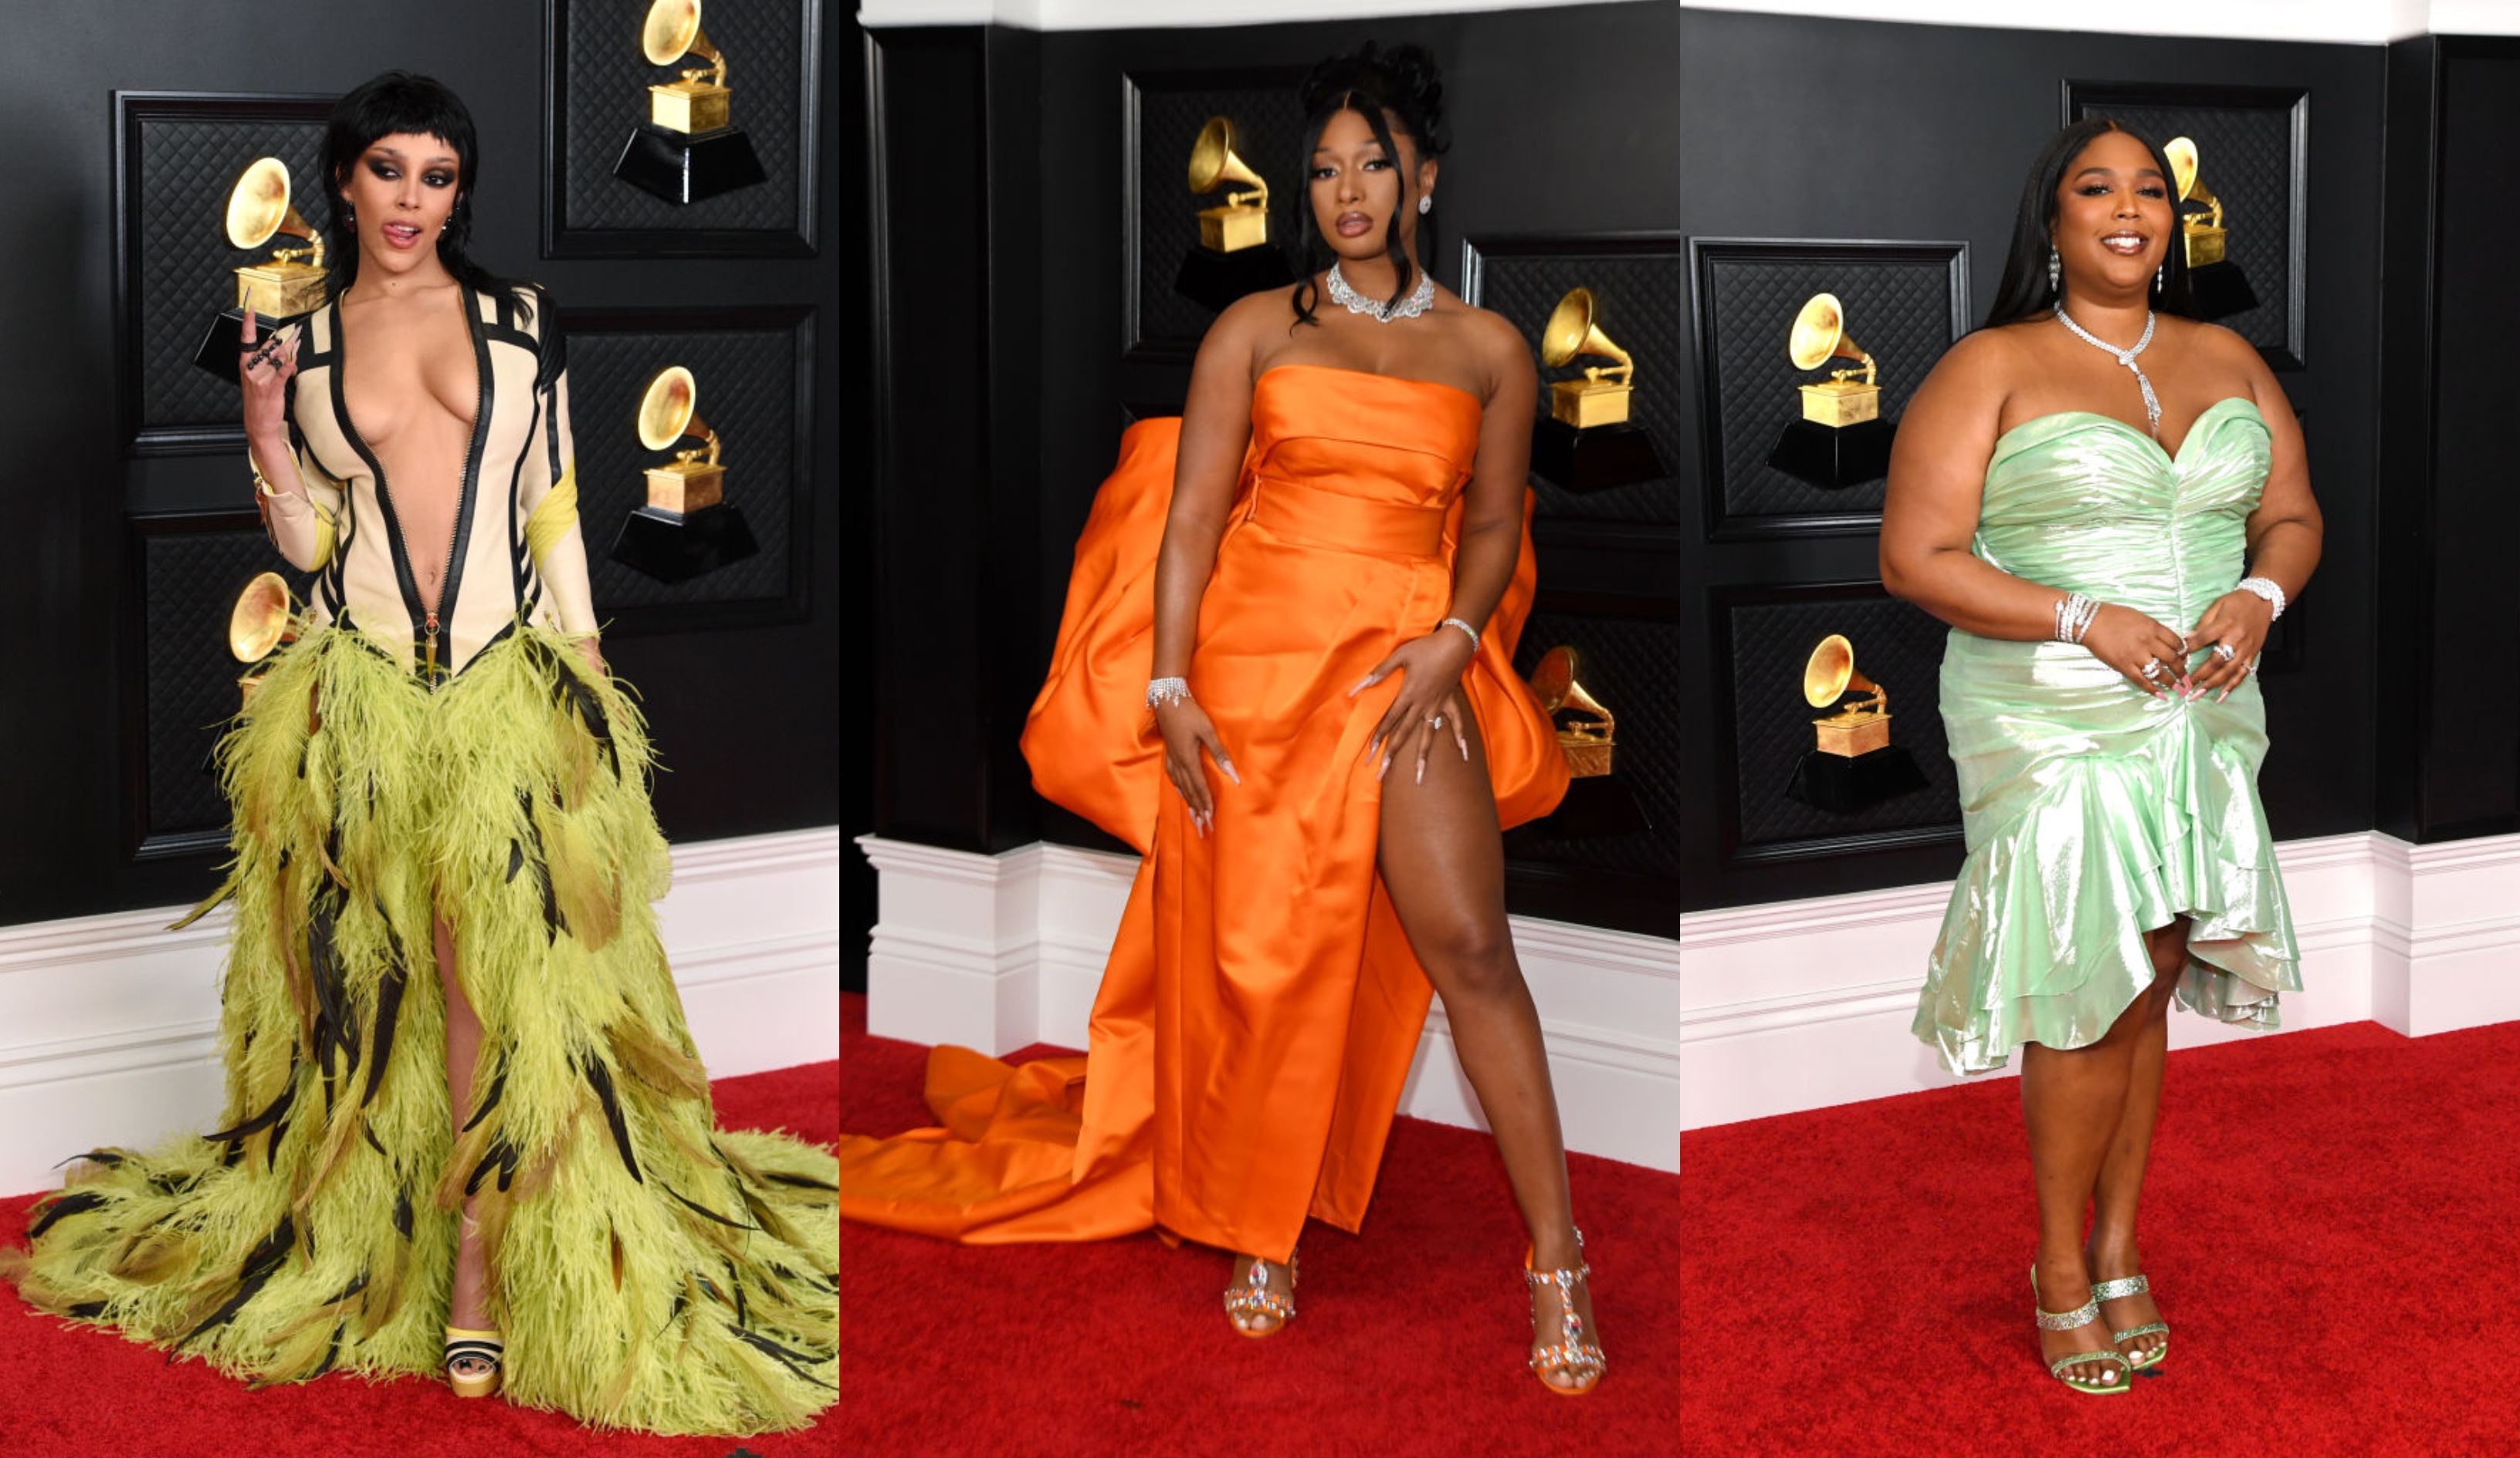 Grammys 2021 Red Carpet: All the Must-See Looks